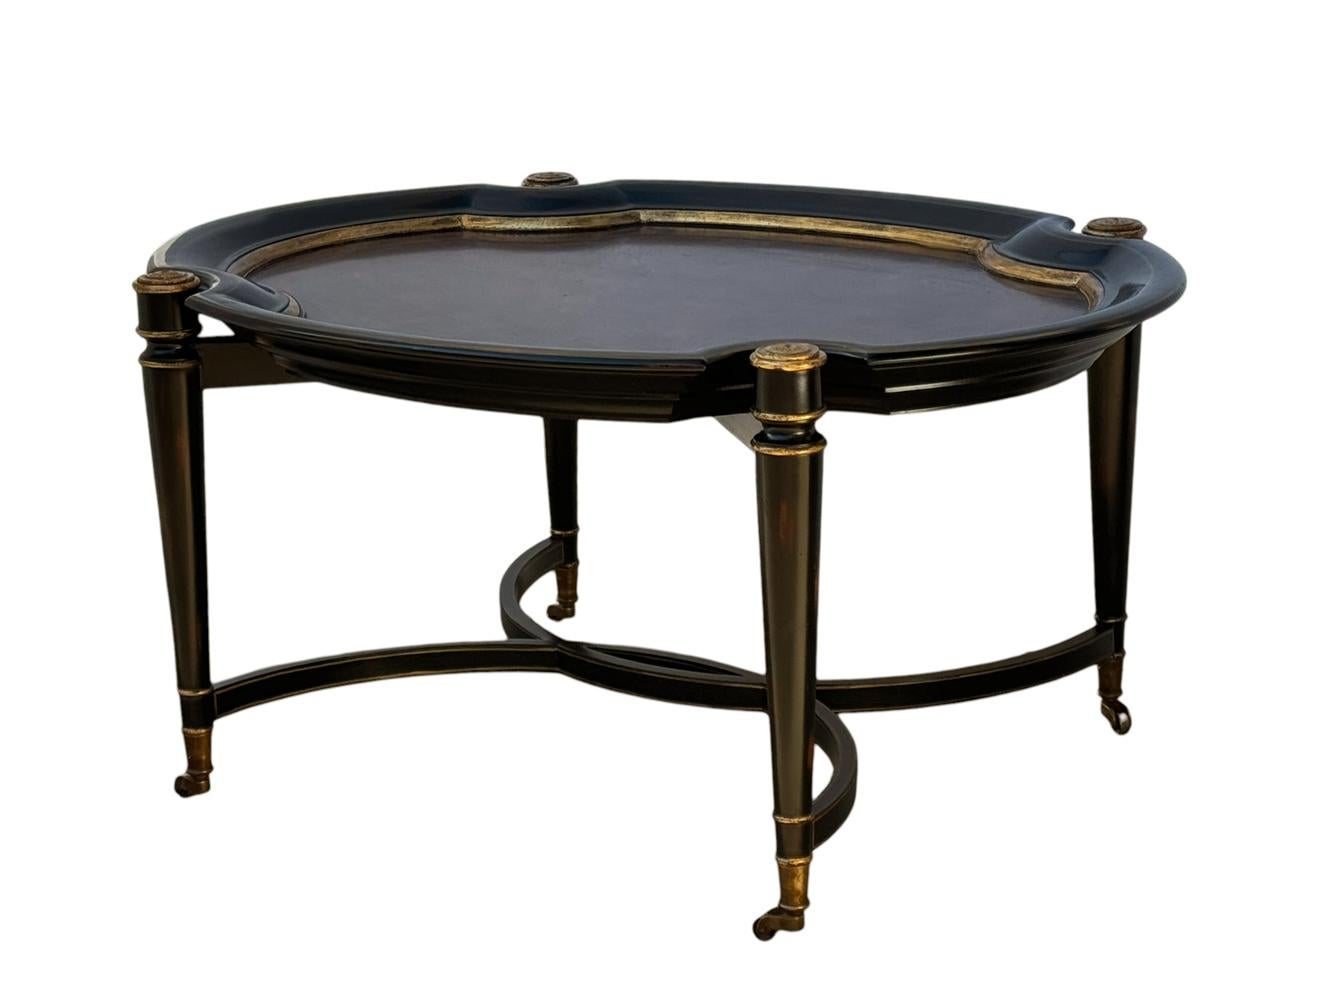 Hollywood Regency Burl Wood with Gold Trim Oval Cocktail Table by Maitland Smith For Sale 3